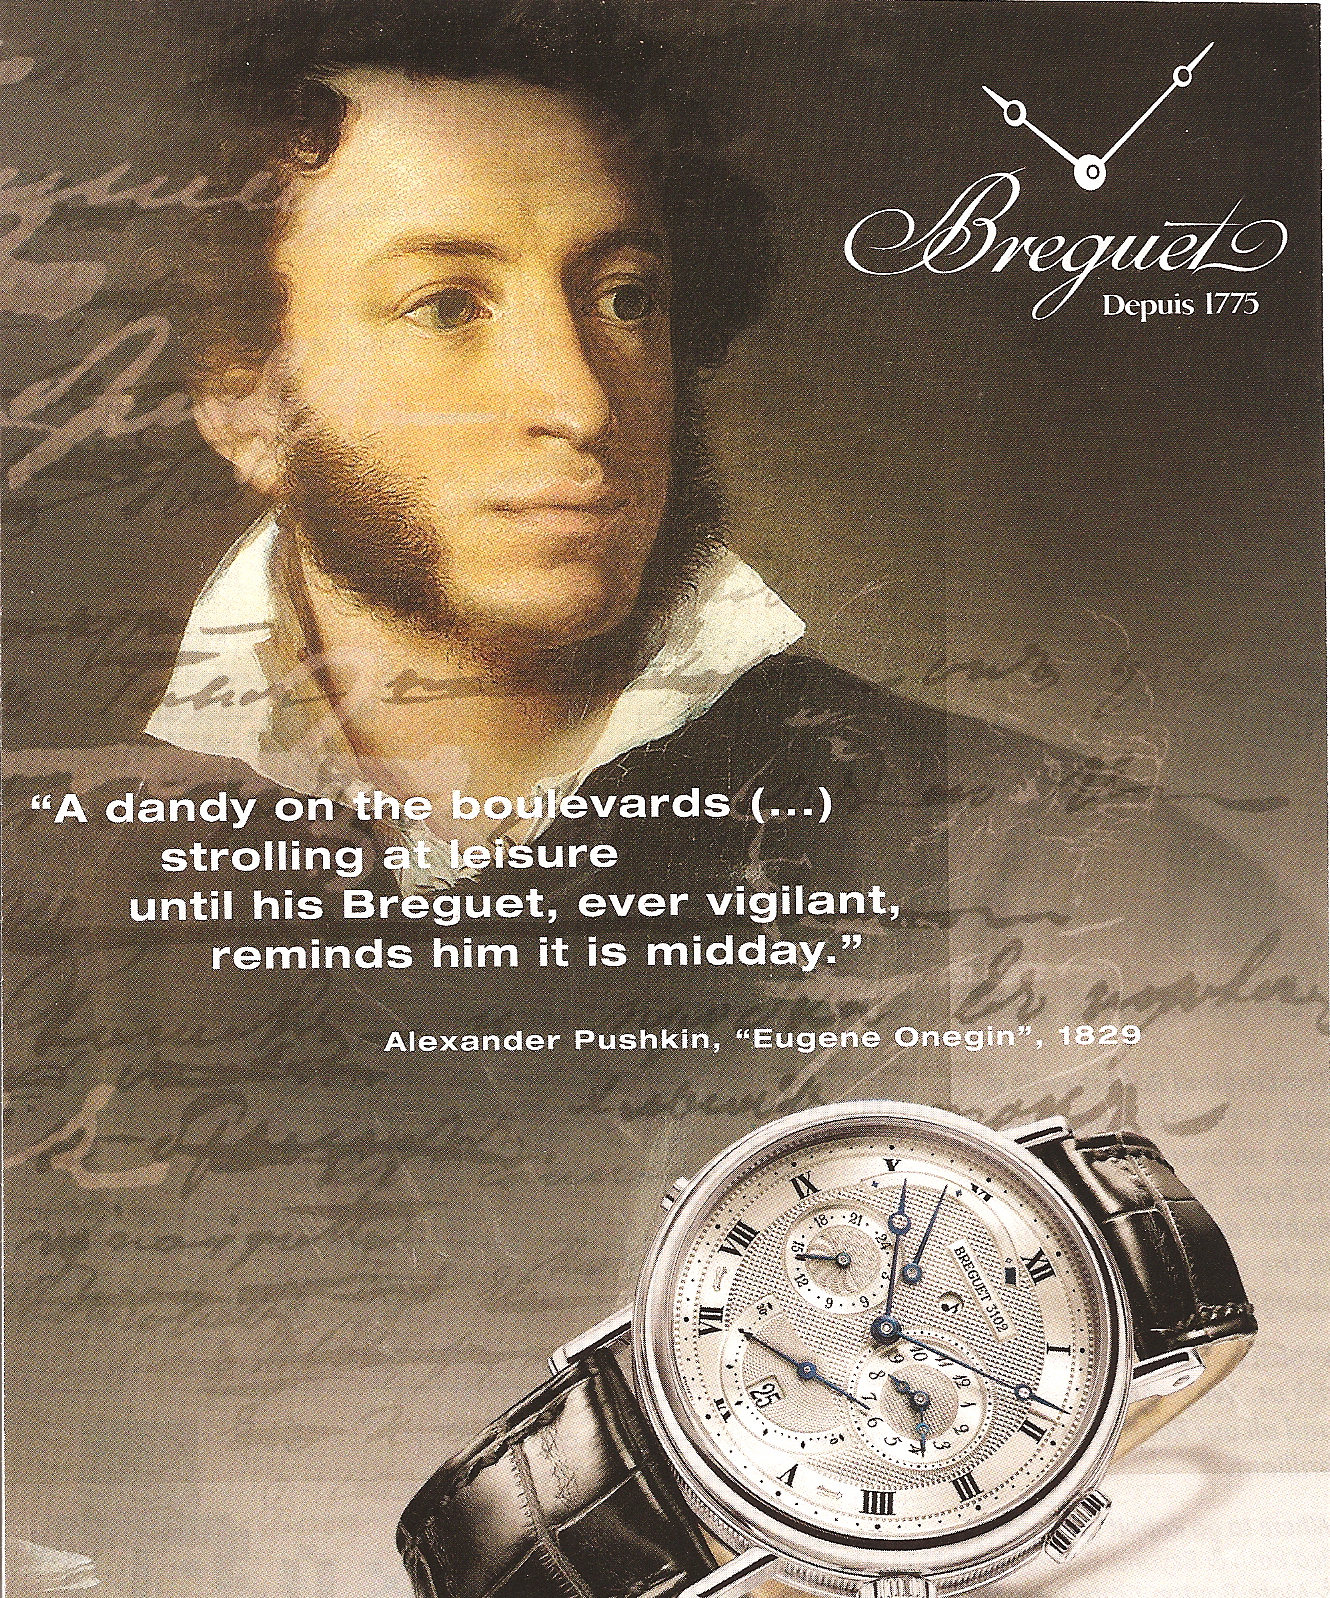 Breguet Watches: Evoking Class with Literature - Sociological Images